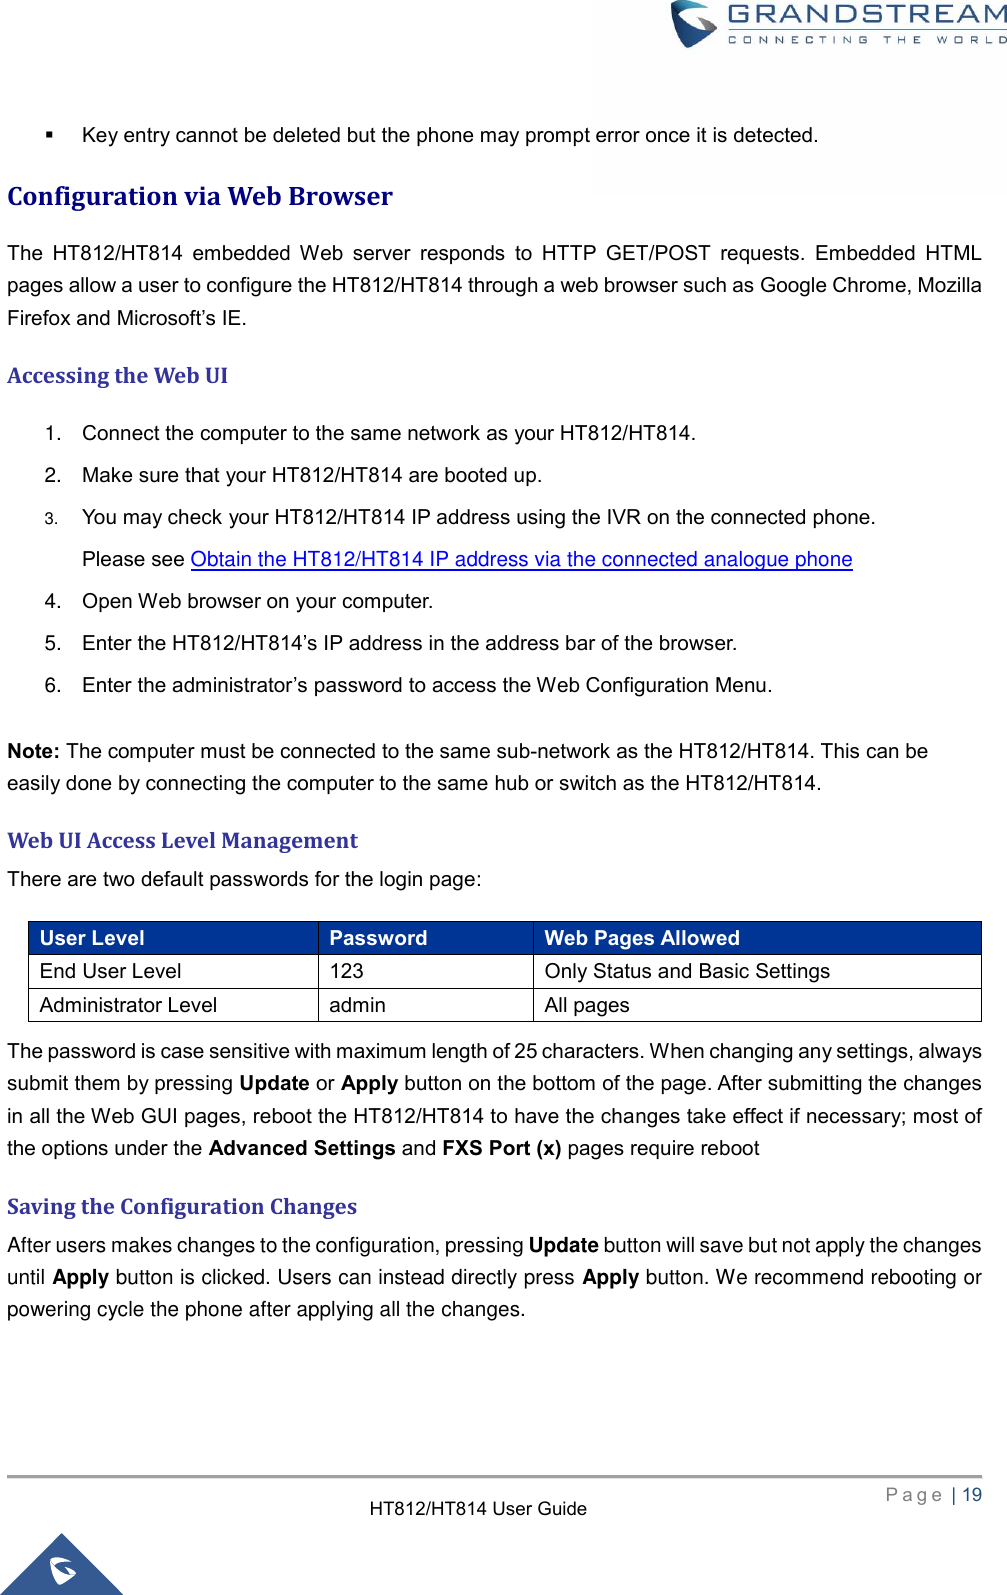     P a g e  | 19        HT812/HT814 User Guide   Key entry cannot be deleted but the phone may prompt error once it is detected.   Configuration via Web Browser The  HT812/HT814  embedded  Web  server  responds  to  HTTP  GET/POST  requests.  Embedded  HTML pages allow a user to configure the HT812/HT814 through a web browser such as Google Chrome, Mozilla Firefox and Microsoft’s IE. Accessing the Web UI 1. Connect the computer to the same network as your HT812/HT814. 2. Make sure that your HT812/HT814 are booted up.   3. You may check your HT812/HT814 IP address using the IVR on the connected phone.   Please see Obtain the HT812/HT814 IP address via the connected analogue phone  4. Open Web browser on your computer. 5. Enter the HT812/HT814’s IP address in the address bar of the browser. 6. Enter the administrator’s password to access the Web Configuration Menu.  Note: The computer must be connected to the same sub-network as the HT812/HT814. This can be easily done by connecting the computer to the same hub or switch as the HT812/HT814. Web UI Access Level Management There are two default passwords for the login page:   User Level Password Web Pages Allowed End User Level 123 Only Status and Basic Settings Administrator Level admin All pages The password is case sensitive with maximum length of 25 characters. When changing any settings, always submit them by pressing Update or Apply button on the bottom of the page. After submitting the changes in all the Web GUI pages, reboot the HT812/HT814 to have the changes take effect if necessary; most of the options under the Advanced Settings and FXS Port (x) pages require reboot Saving the Configuration Changes After users makes changes to the configuration, pressing Update button will save but not apply the changes until Apply button is clicked. Users can instead directly press Apply button. We recommend rebooting or powering cycle the phone after applying all the changes.  